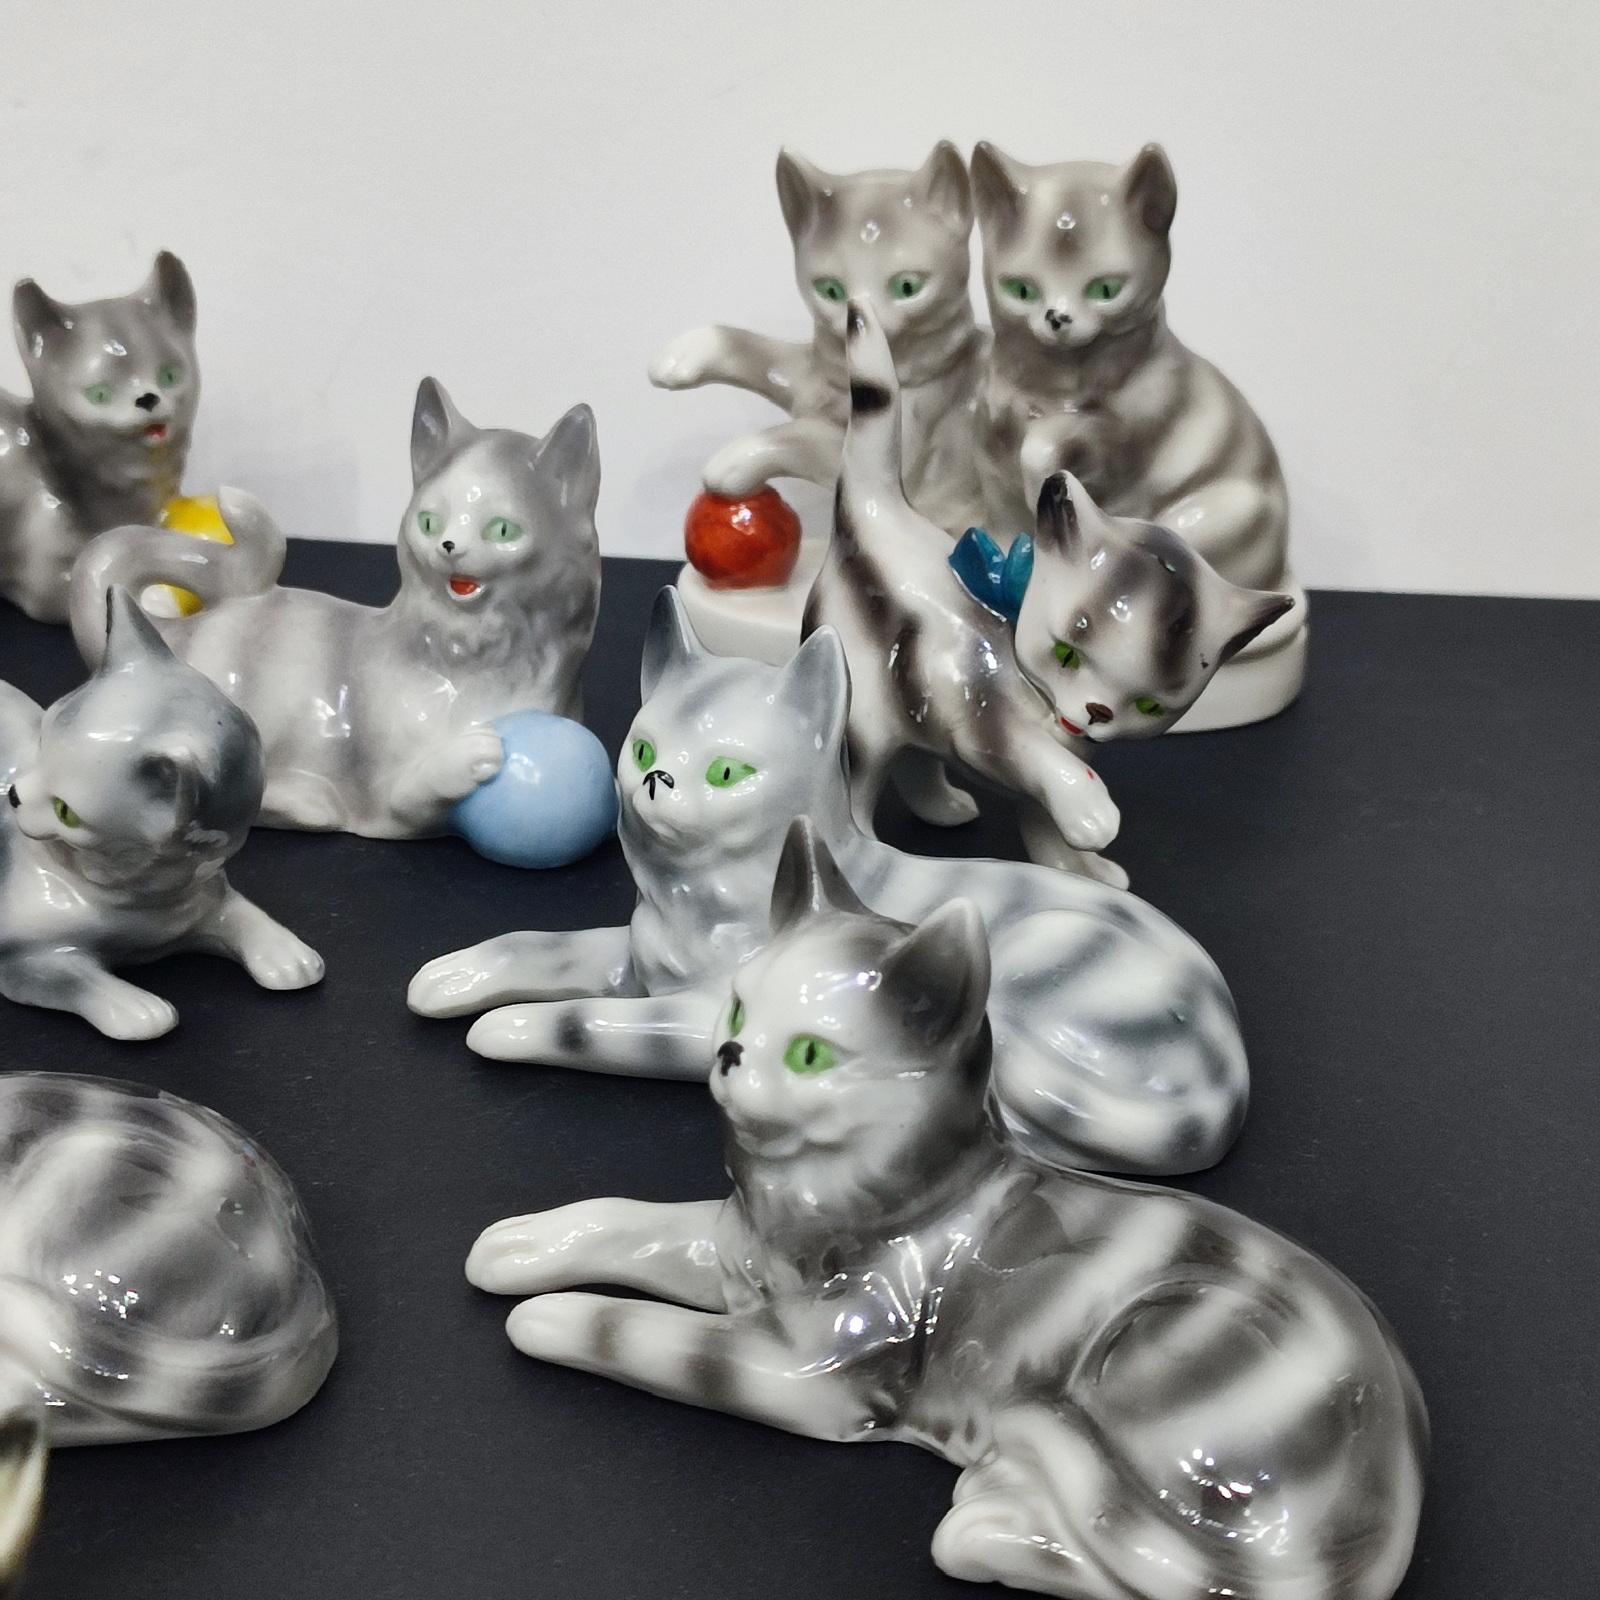 Hand-Painted Carl Scheidig Gräfenthal Collection of Cat Figurines, Germany 1940s For Sale